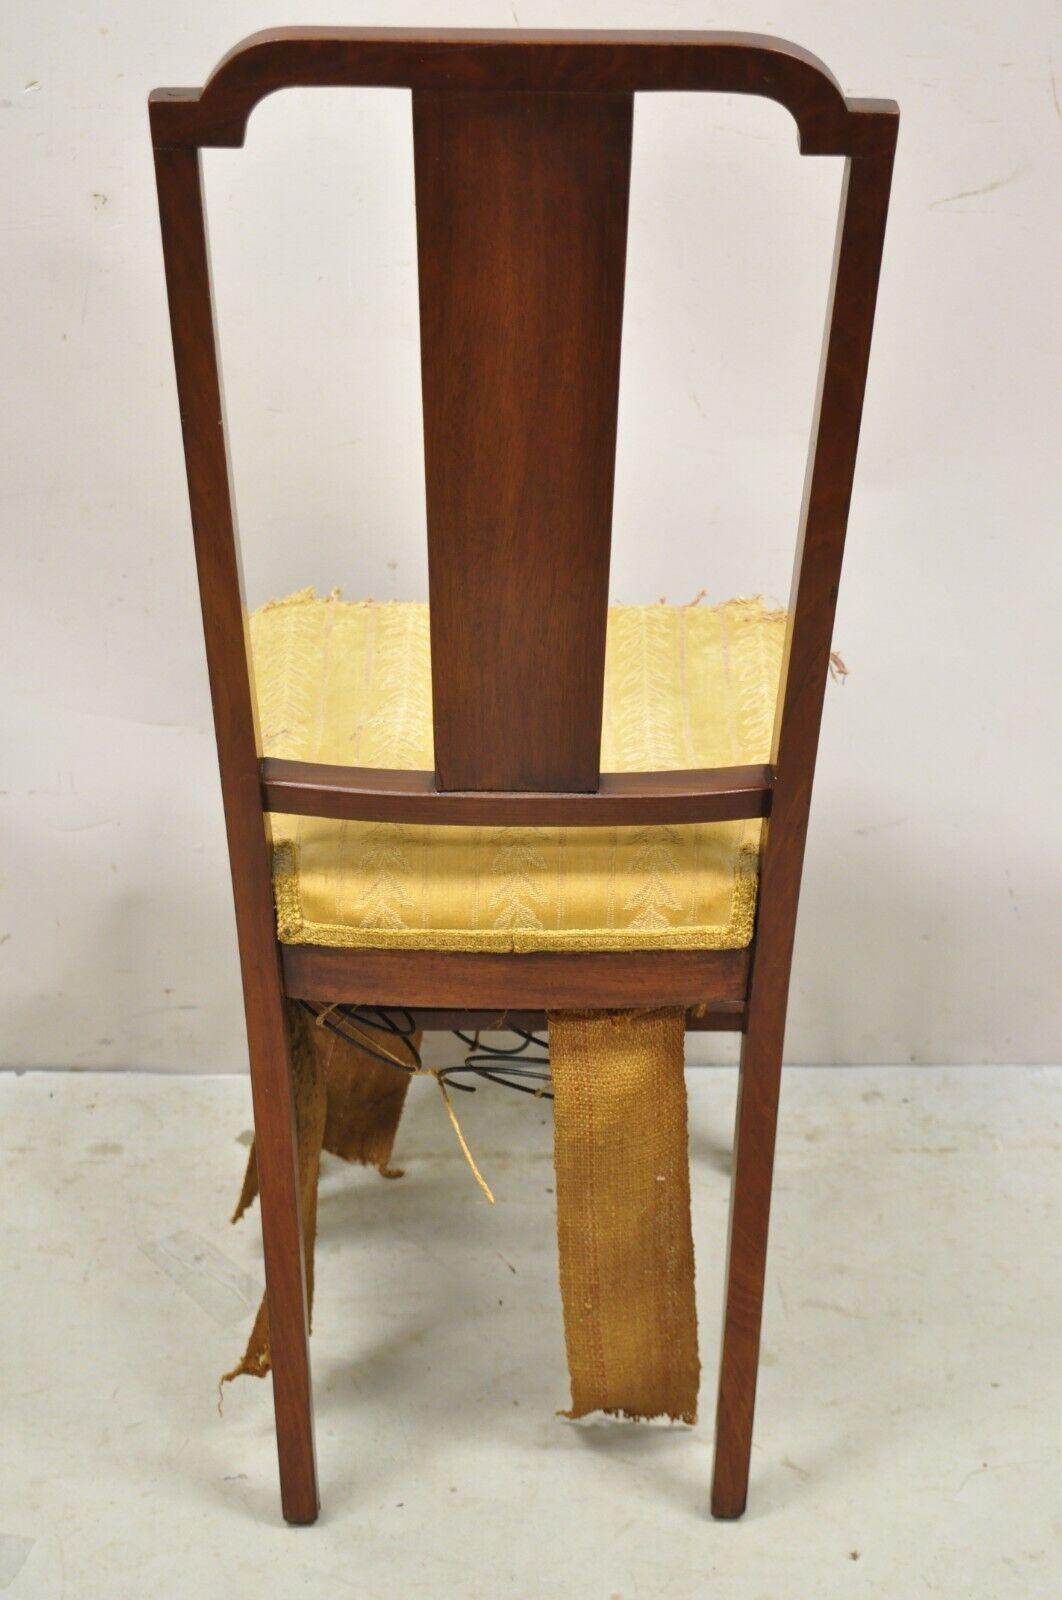 Antique Edwardian Mahogany Side Chair with Pencil and Pinwheel Inlay For Sale 6